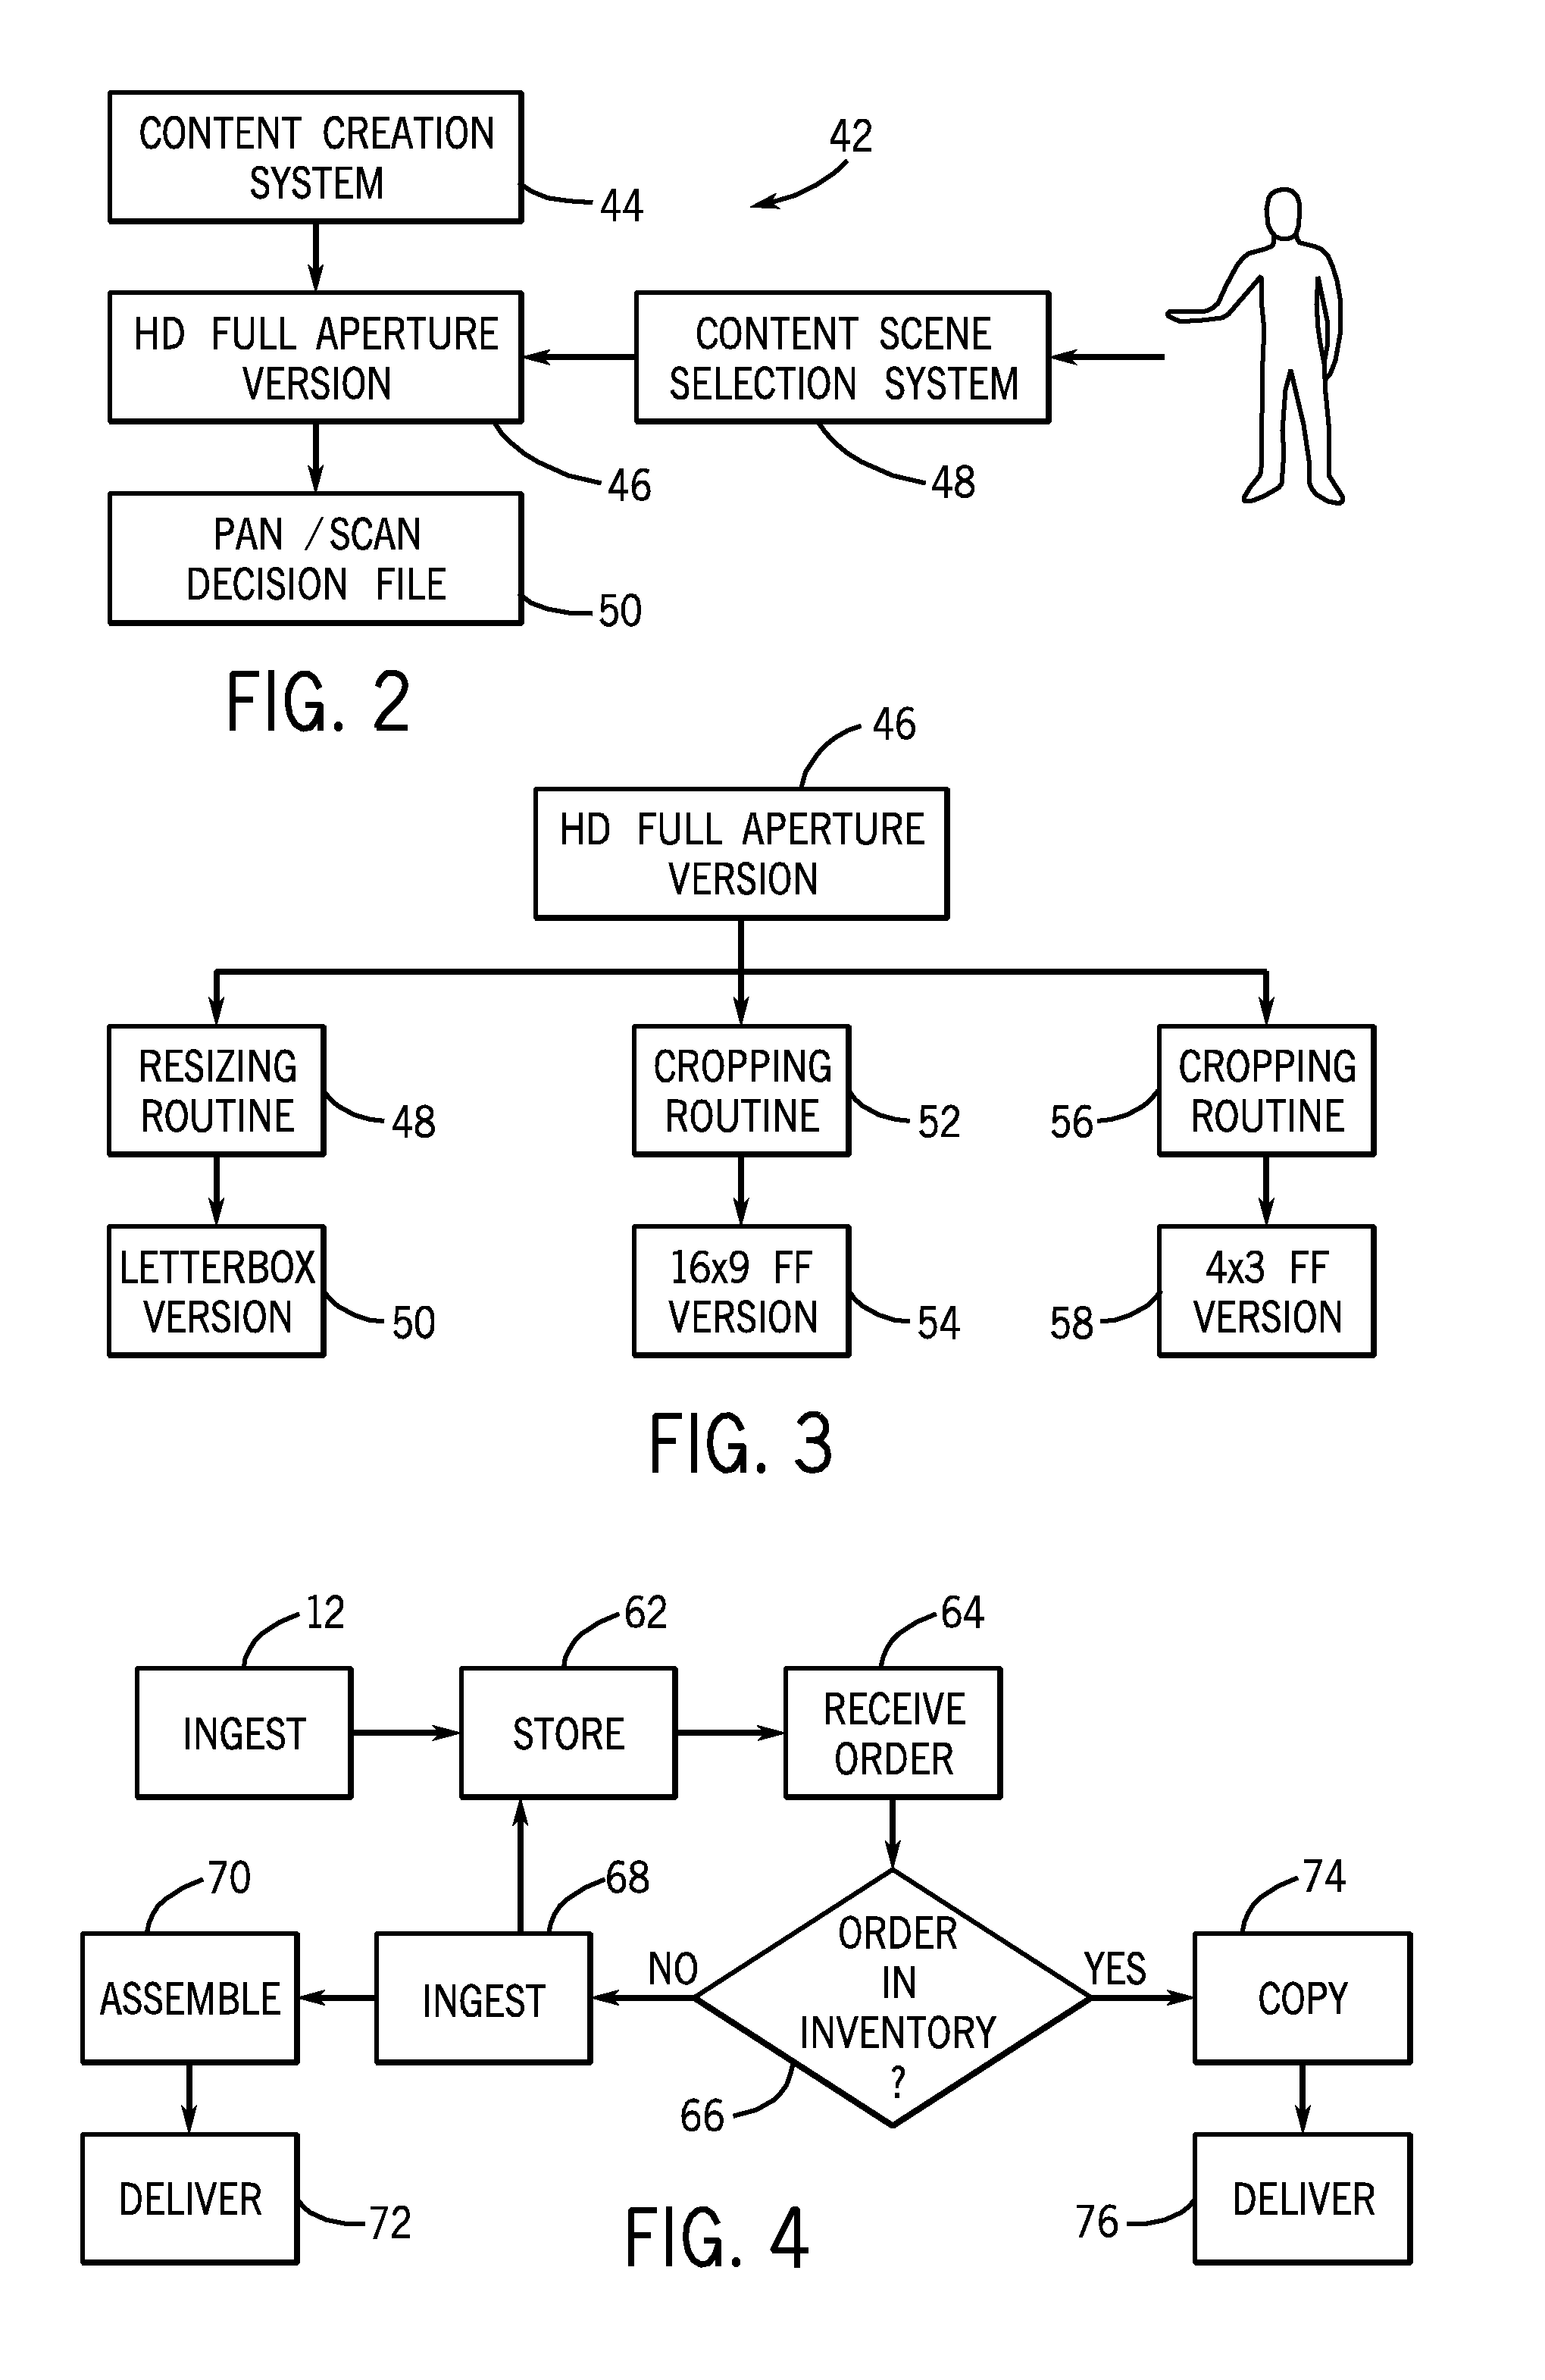 Digital content integration and delivery system and method